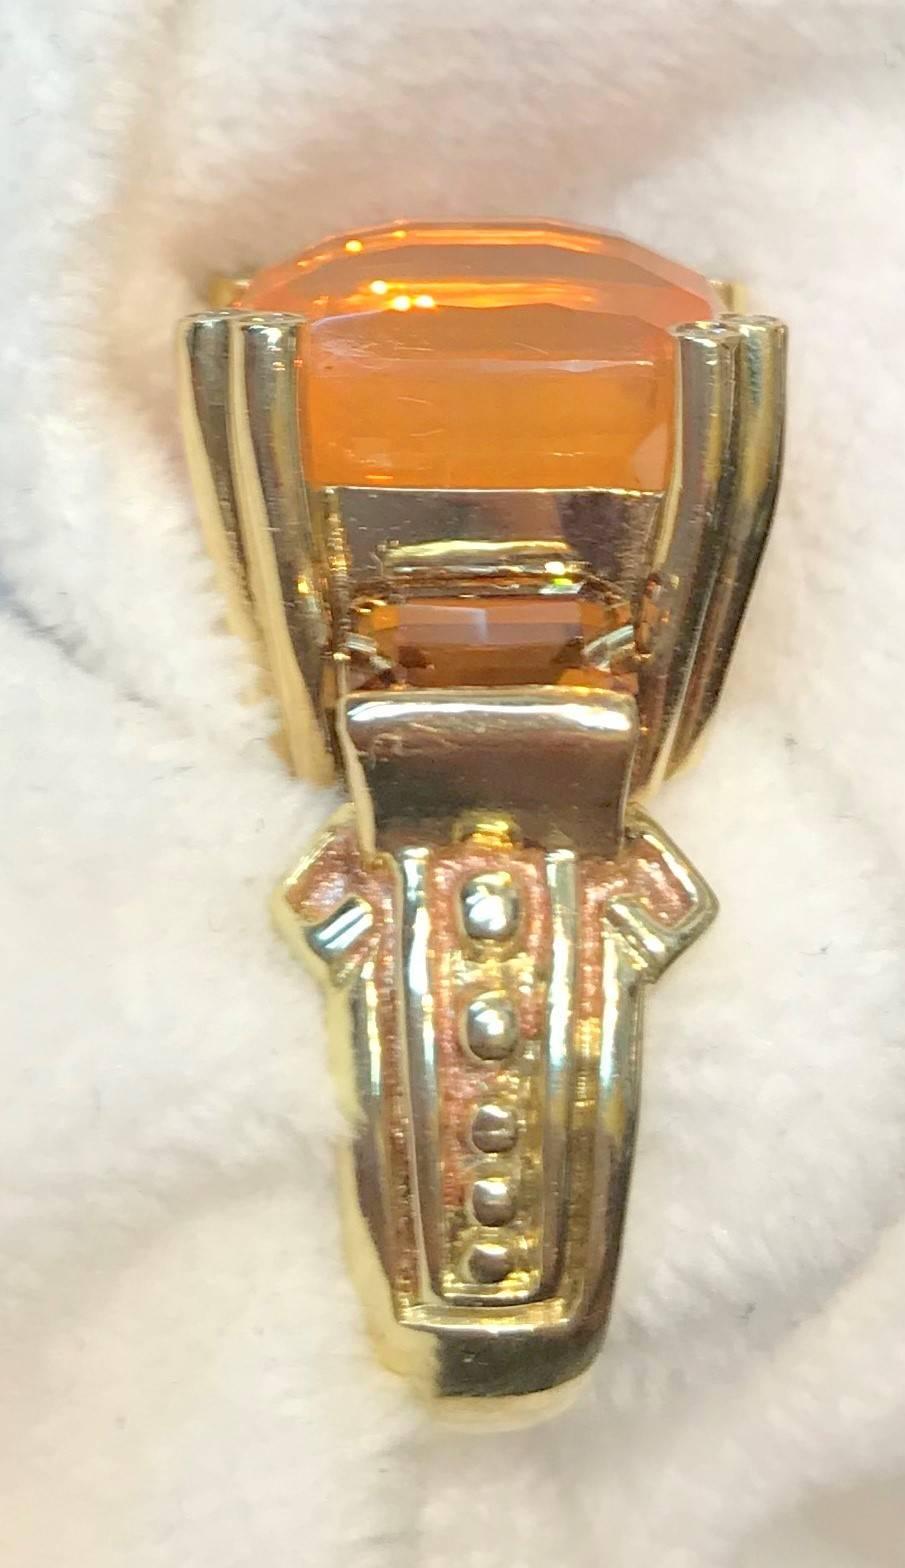 A beautiful checkerboard cushion cut Mexican Fire Opal over 8cts set with .04cts diamond prongs with 3.26cts of natural cognac zircons on the side all set on a handmade,  18K yellow gold byzantine style shank.  